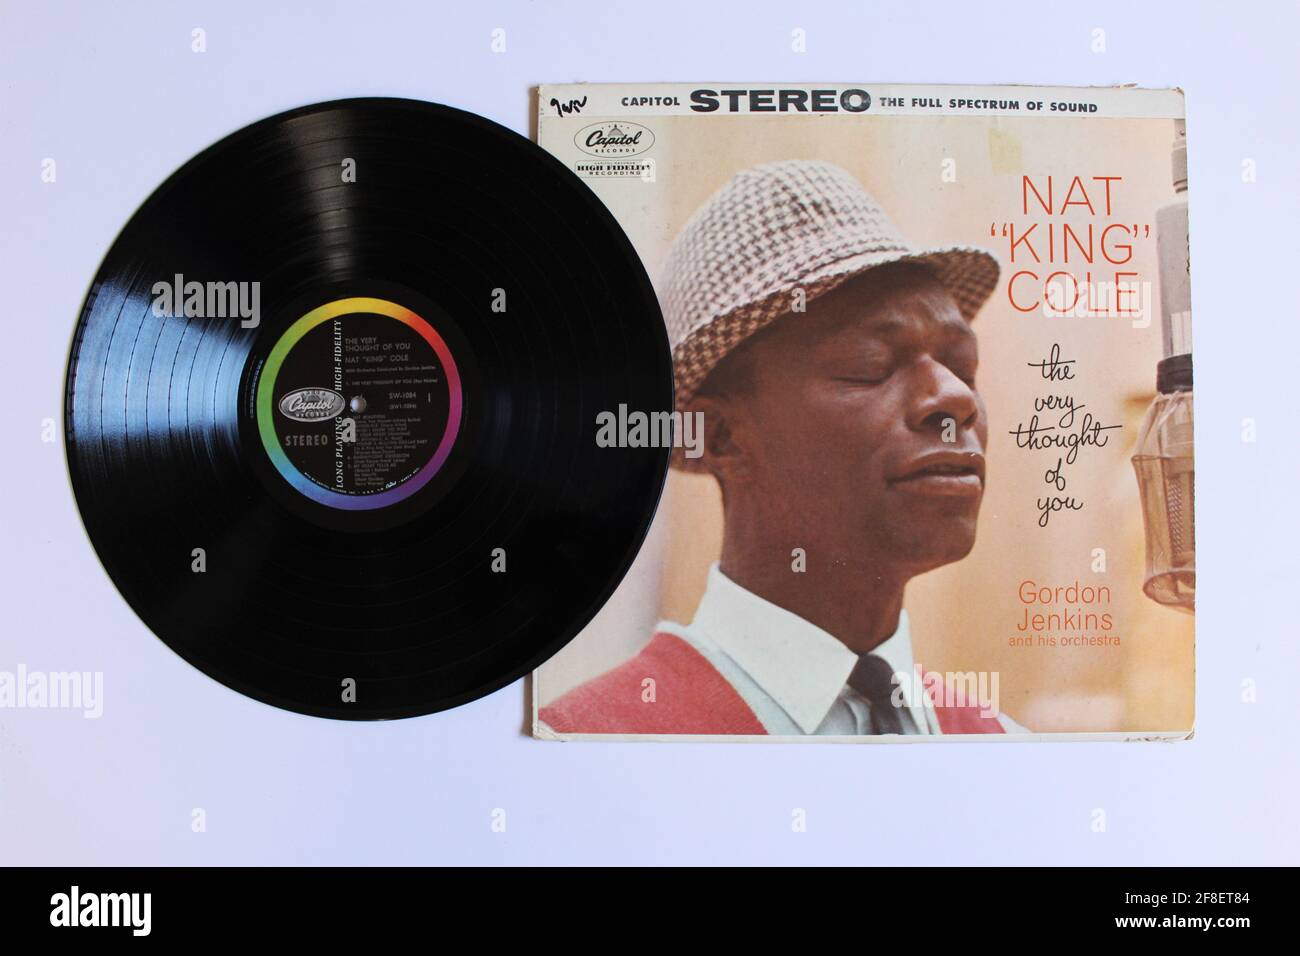 Jolly Verwijdering bidden Traditional pop, rnb and jazz artist, Nat King Cole music album on vinyl  record LP disc. Titled: The Very Thought of You Stock Photo - Alamy